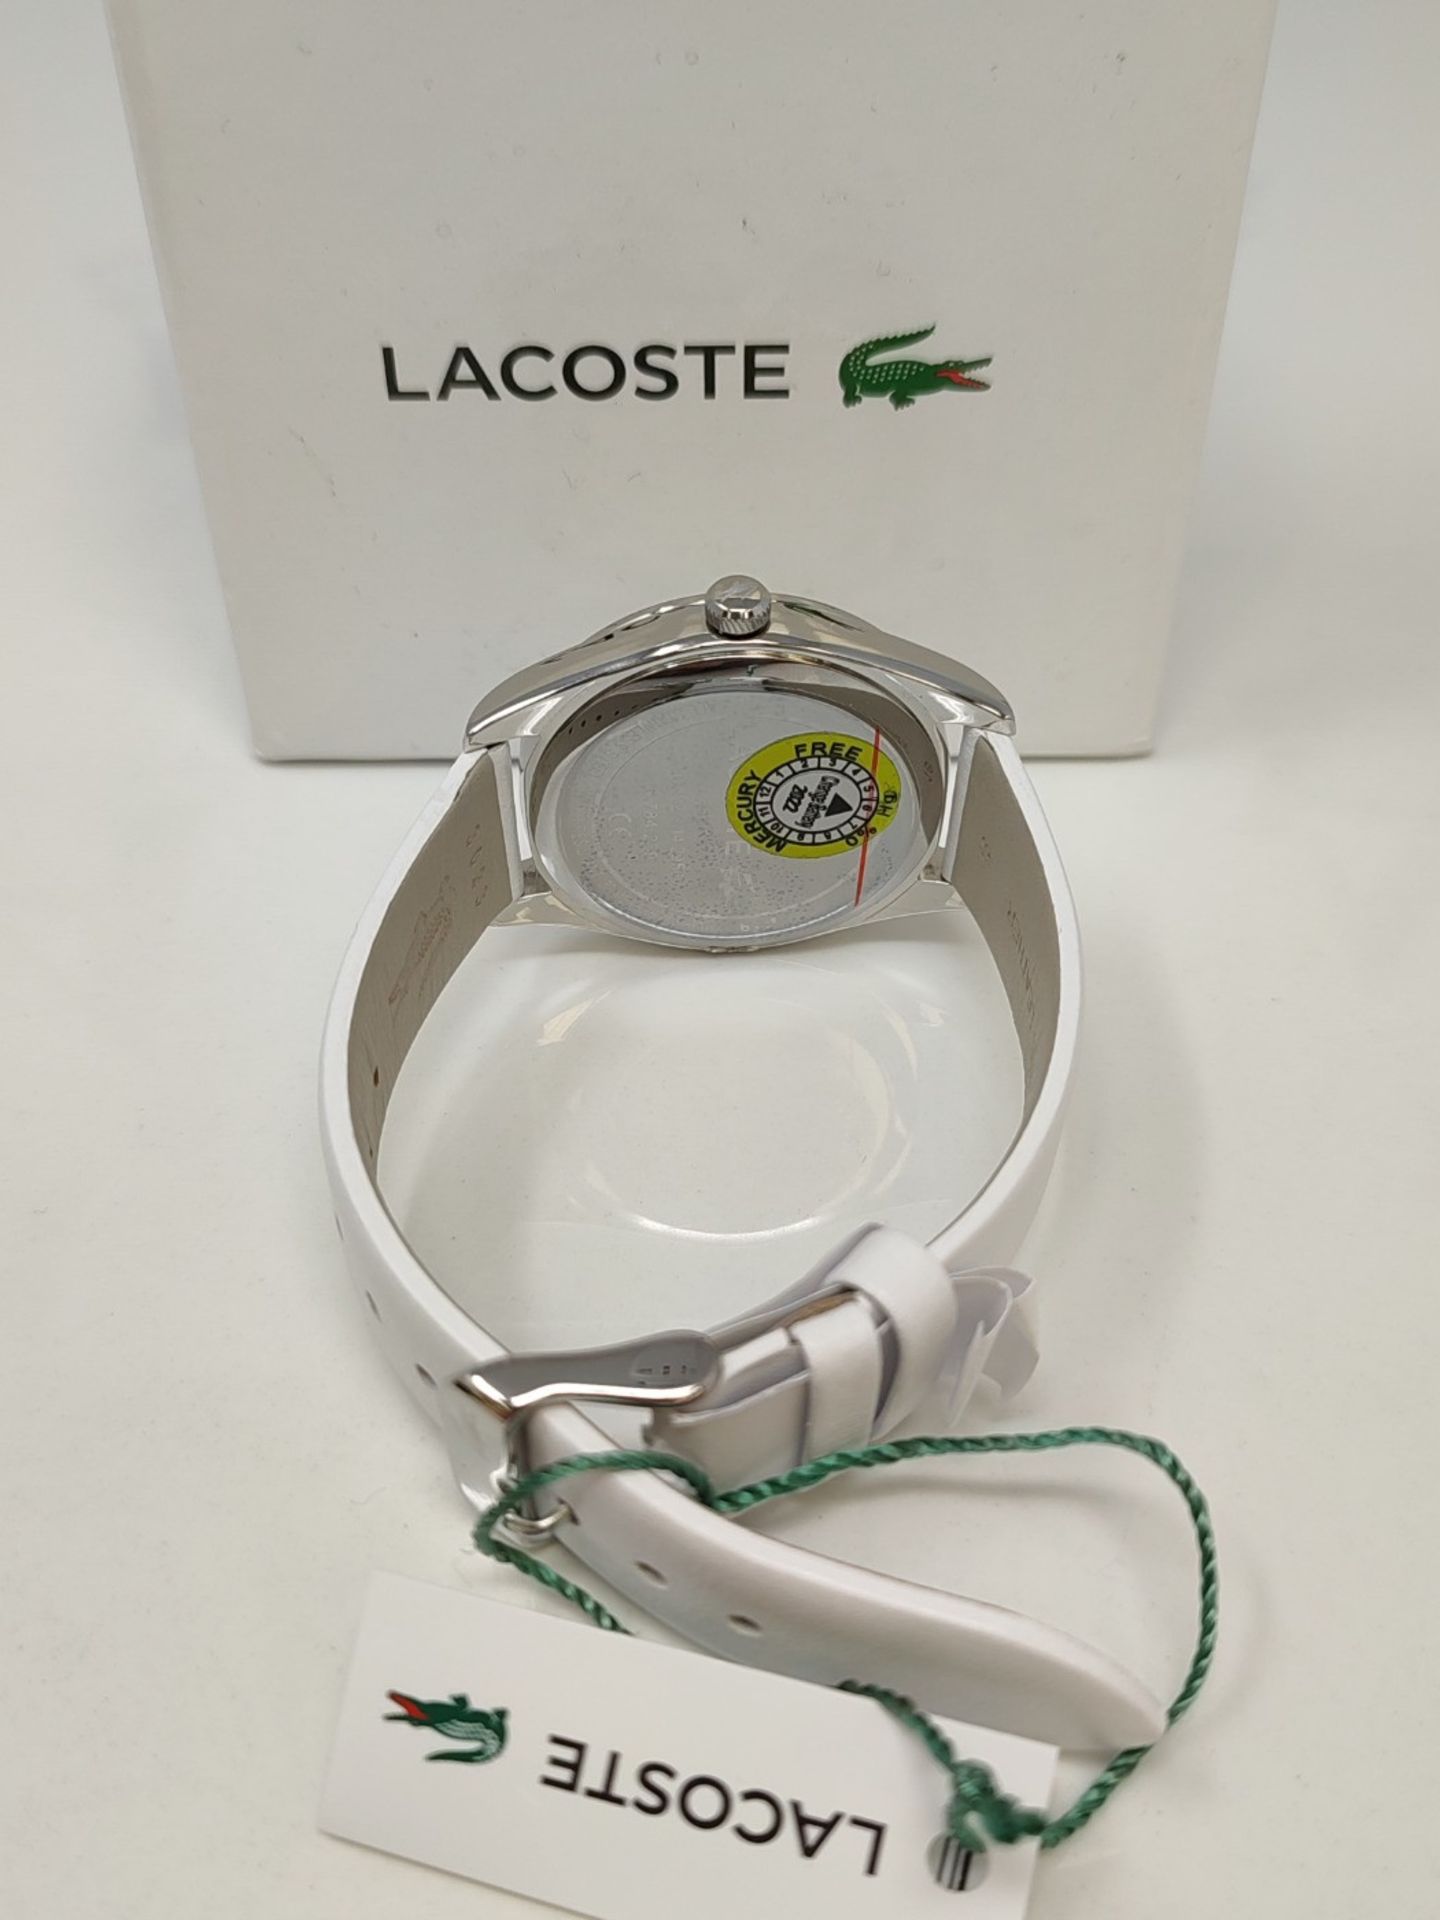 RRP £119.00 Lacoste analog quartz watch for women with white leather strap - 2001159 - Image 3 of 3